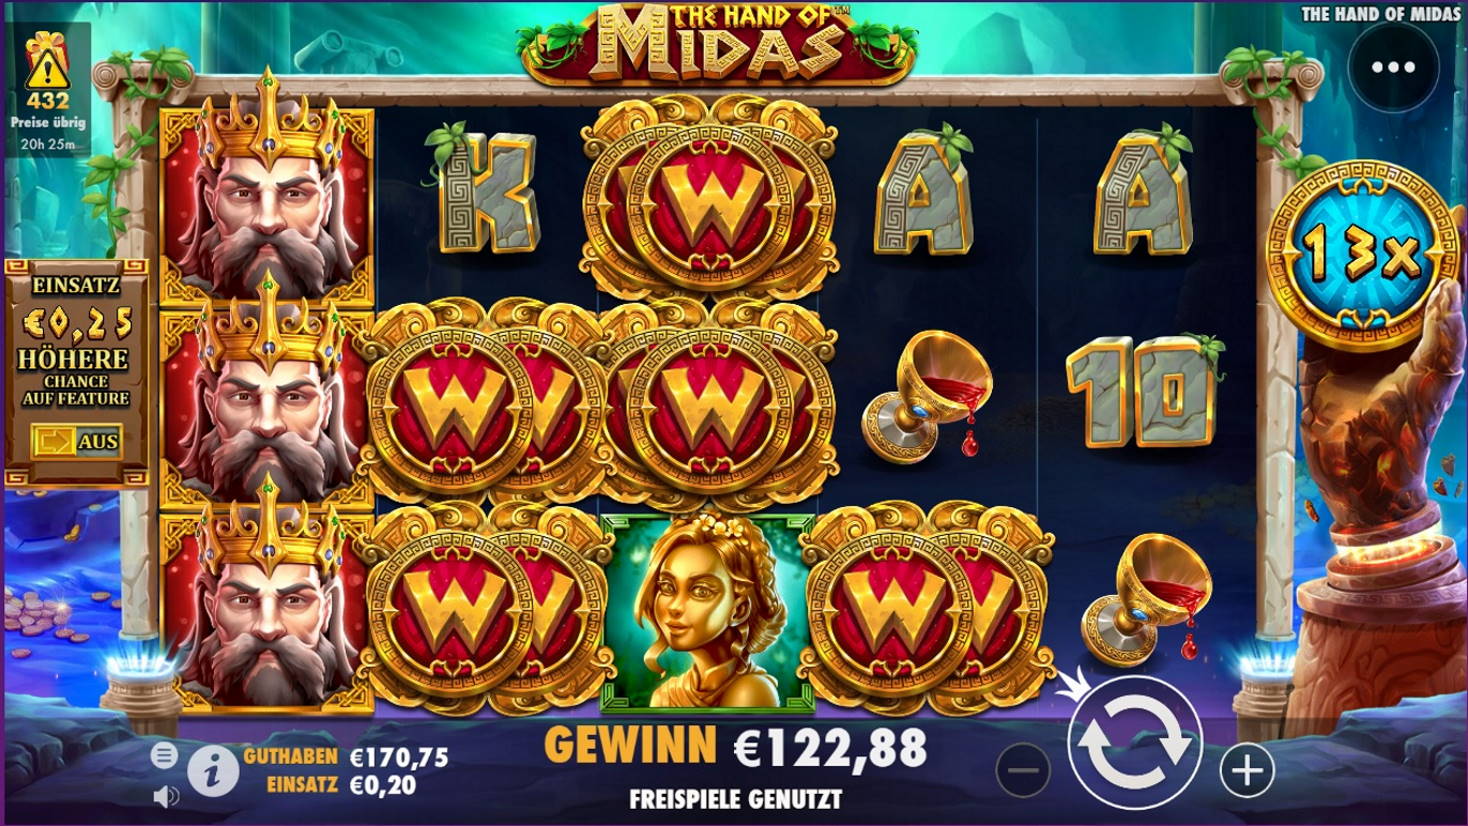 The Hand of Midas Casino win picture by x3n81 25.2.2022 122.88e 614X Wheelz